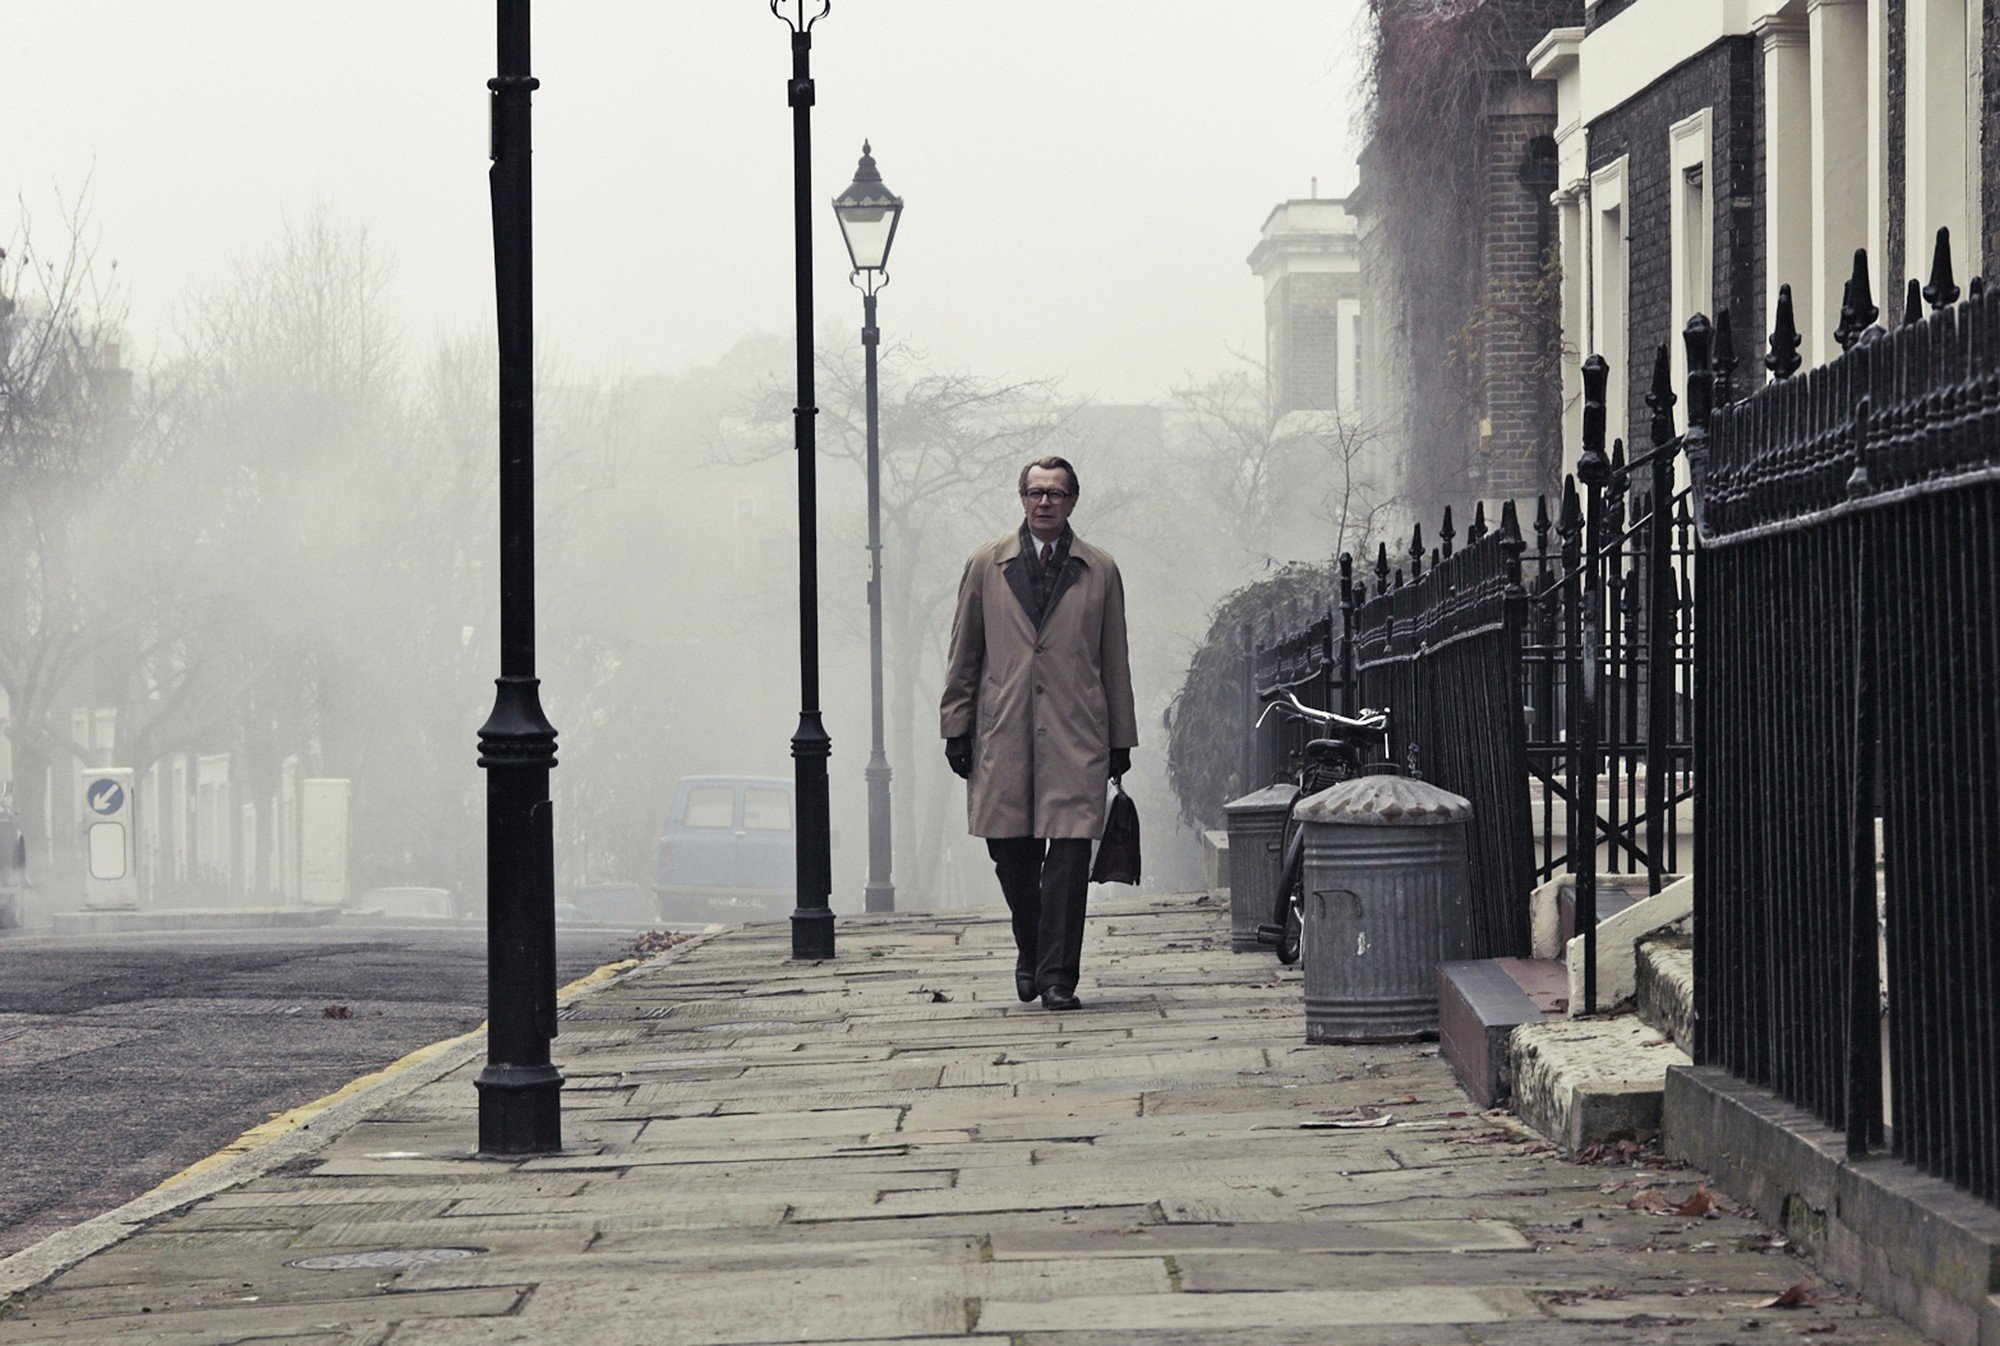 Gary Oldman stars as George Smiley in Focus Features' Tinker, Tailor, Soldier, Spy (2011)